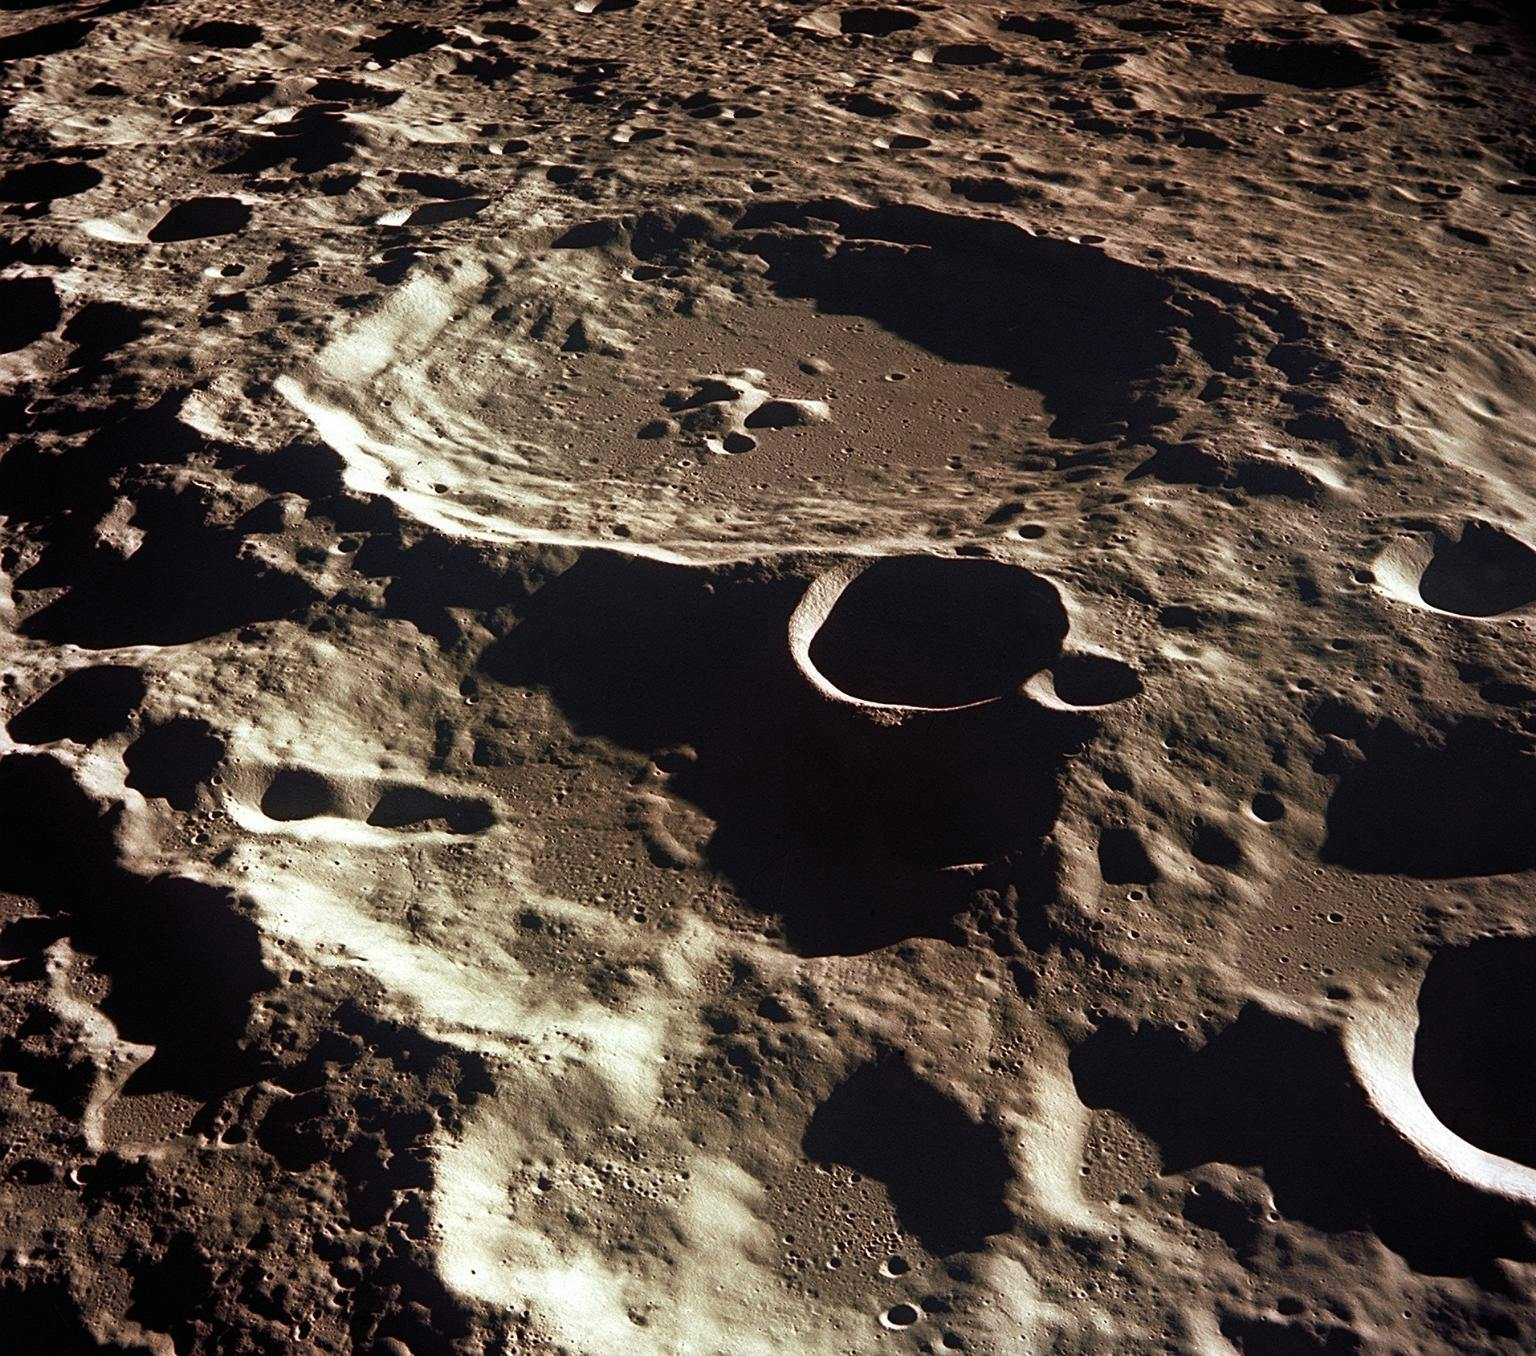 distinct and large craters on the moon, as seen from the Apollo 11 spacecraft